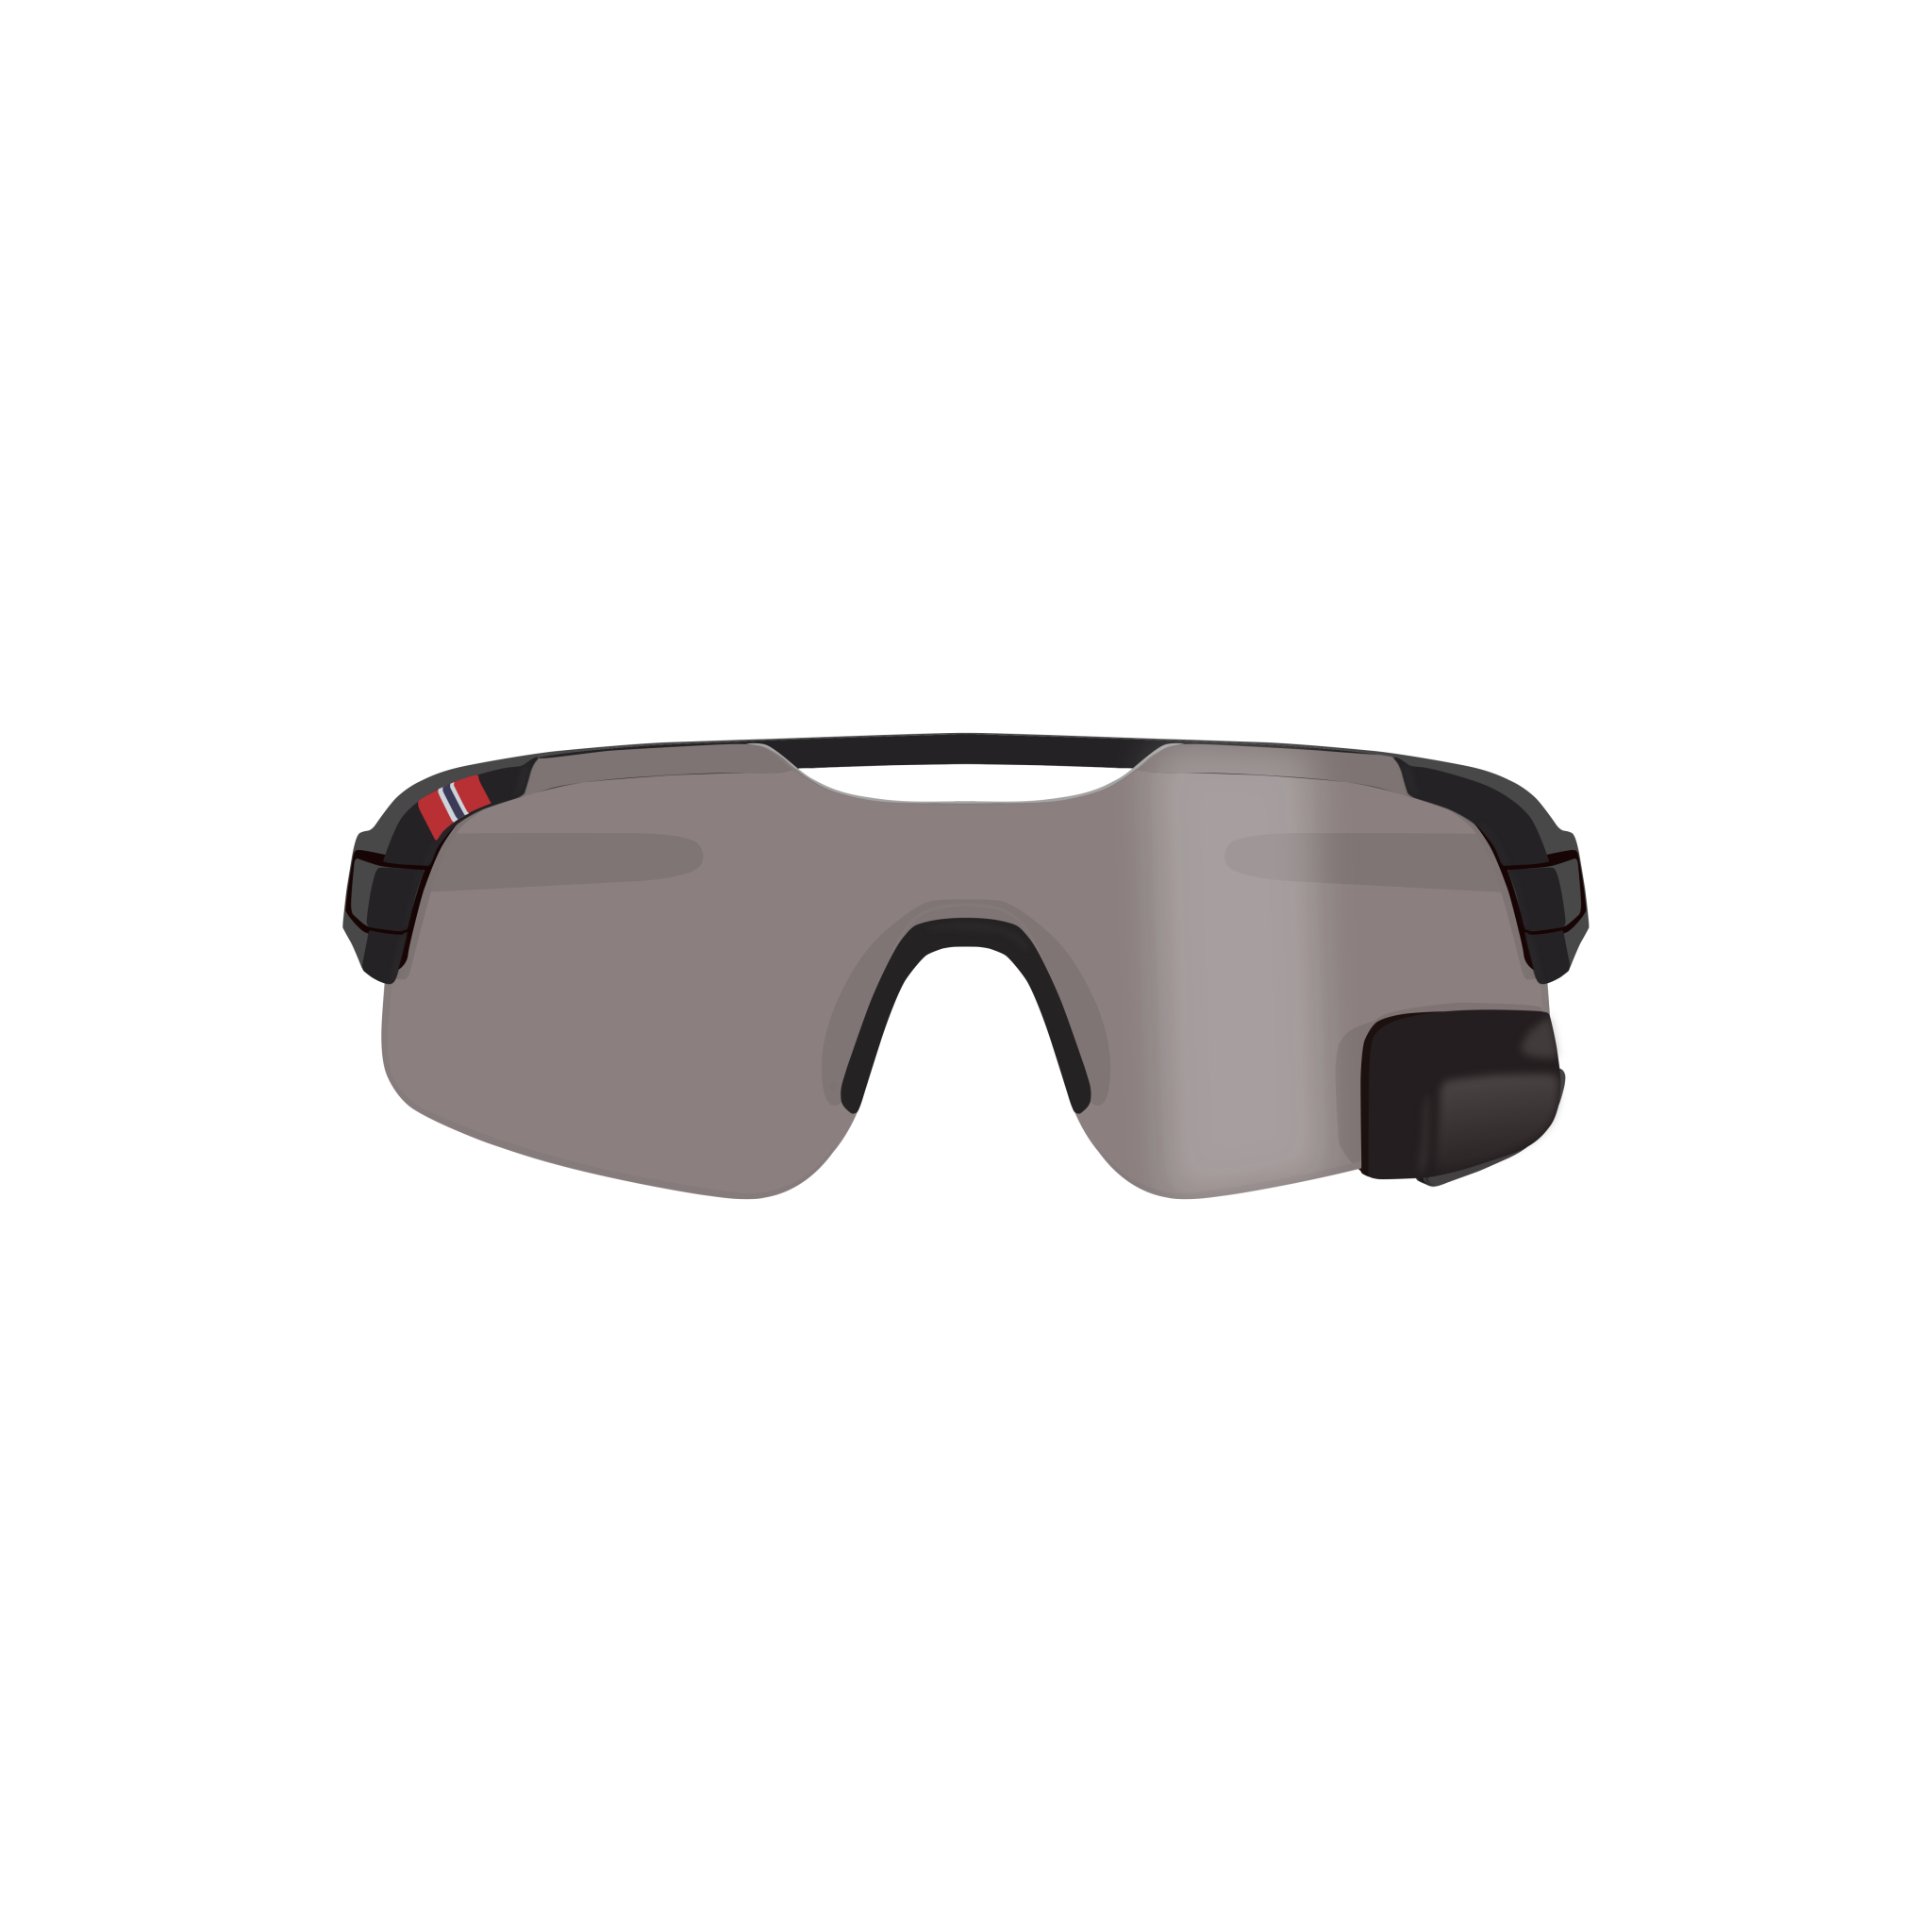 TRIEYE VIEW AIR CYCLING GLASSES WITH MIRROR - Extreme Sports